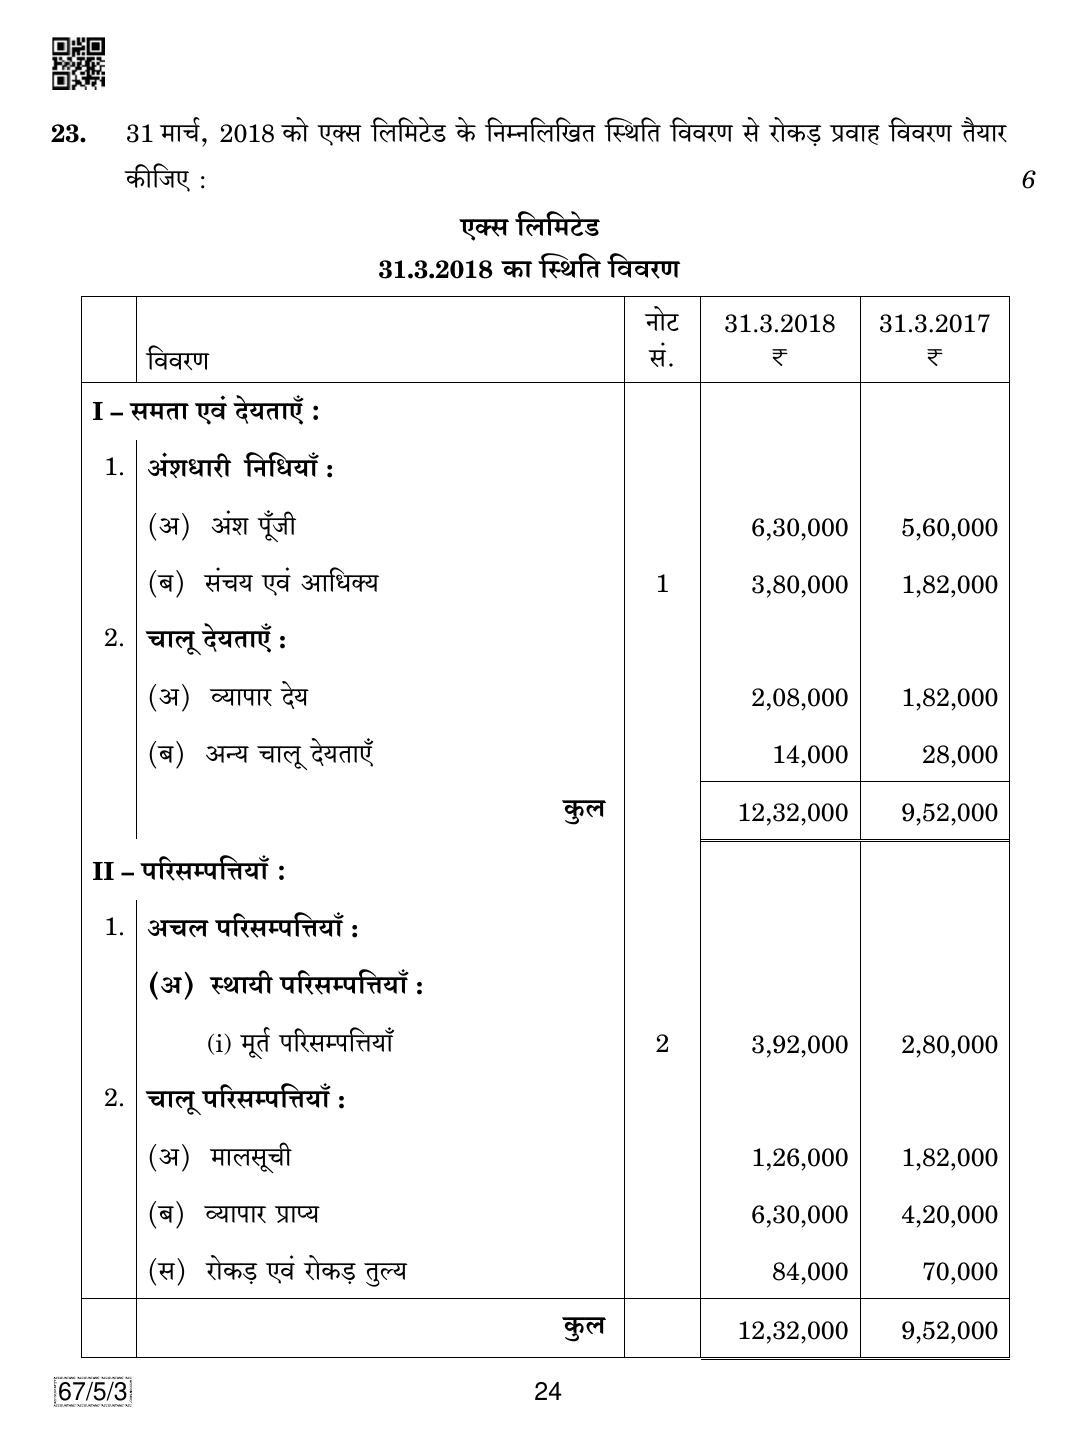 CBSE Class 12 67-5-3 Accountancy 2019 Question Paper - Page 24